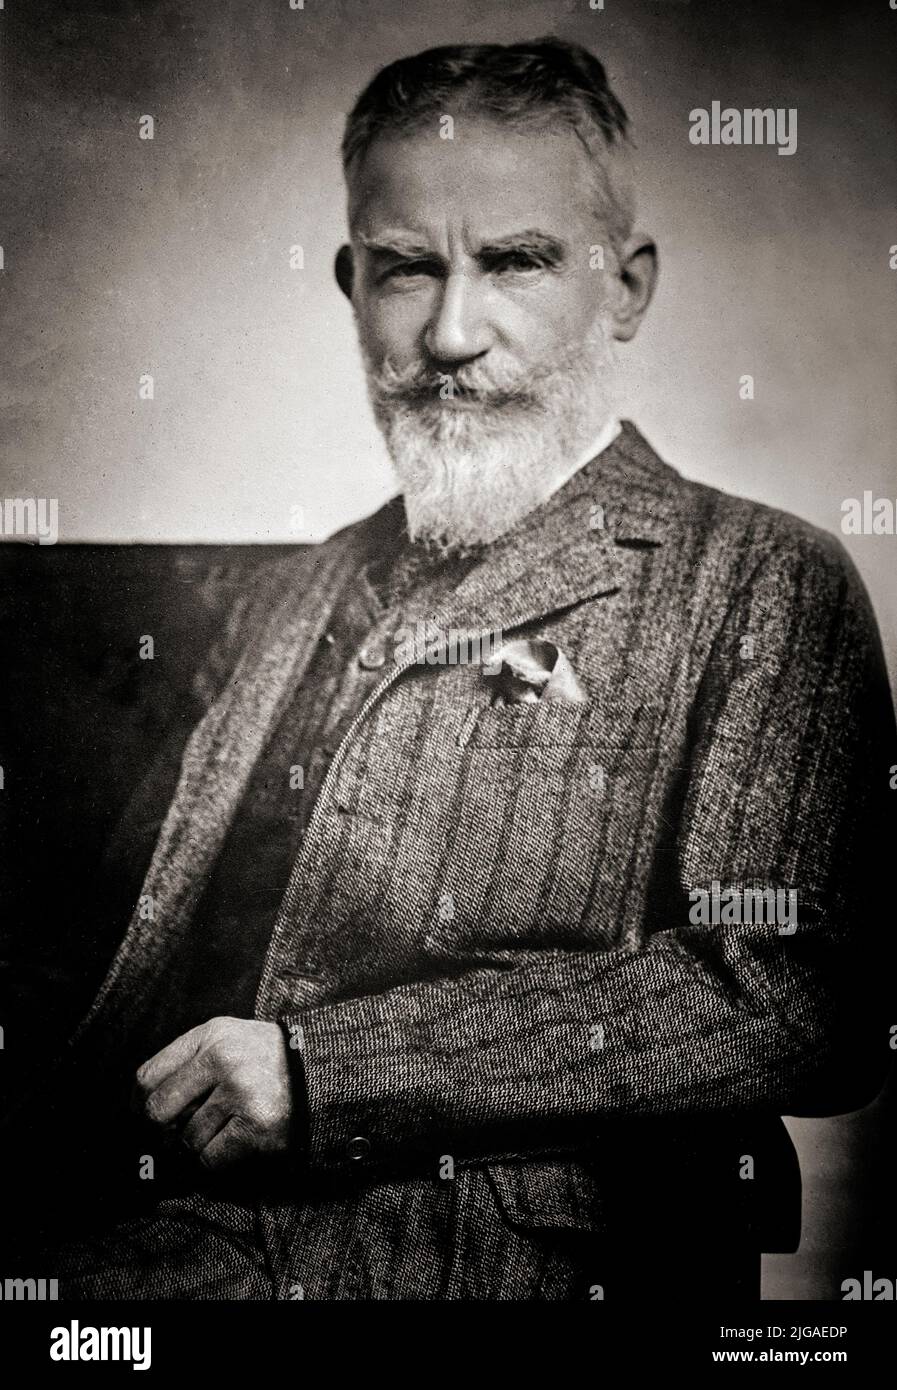 A portrait of George Bernard Shaw (1856-1950), Irish playwright, critic, polemicist and political activist, born in Dublin, but moved to London in 1876. His influence on Western theatre, culture and politics extended from the 1880s to his death and beyond. He wrote more than sixty plays, including major works such as Man and Superman (1902) and Pygmalion (1913), Shaw became the leading dramatist of his generation, and in 1925 was awarded the Nobel Prize in Literature. Stock Photo